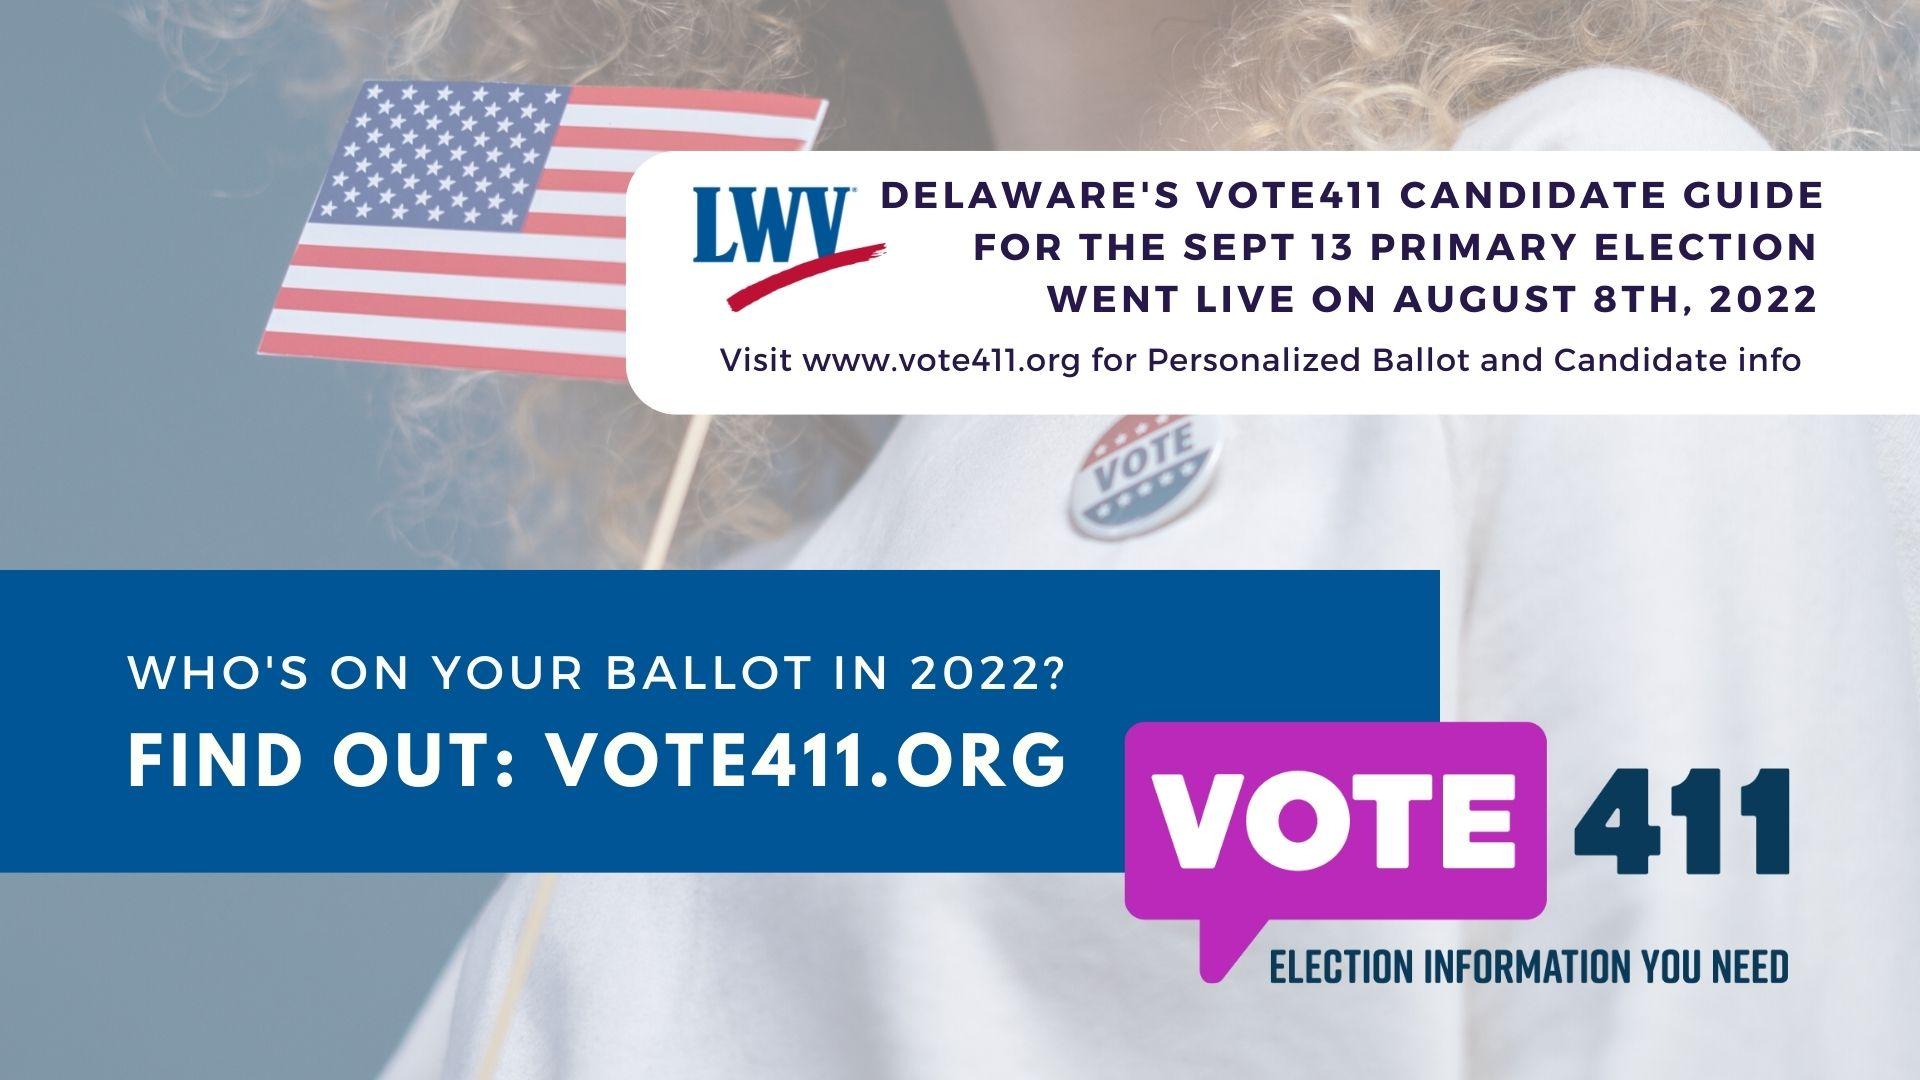 Delaware's VOTE411 Guide for the Sept 13 Primary Election went live on August 8, 2022